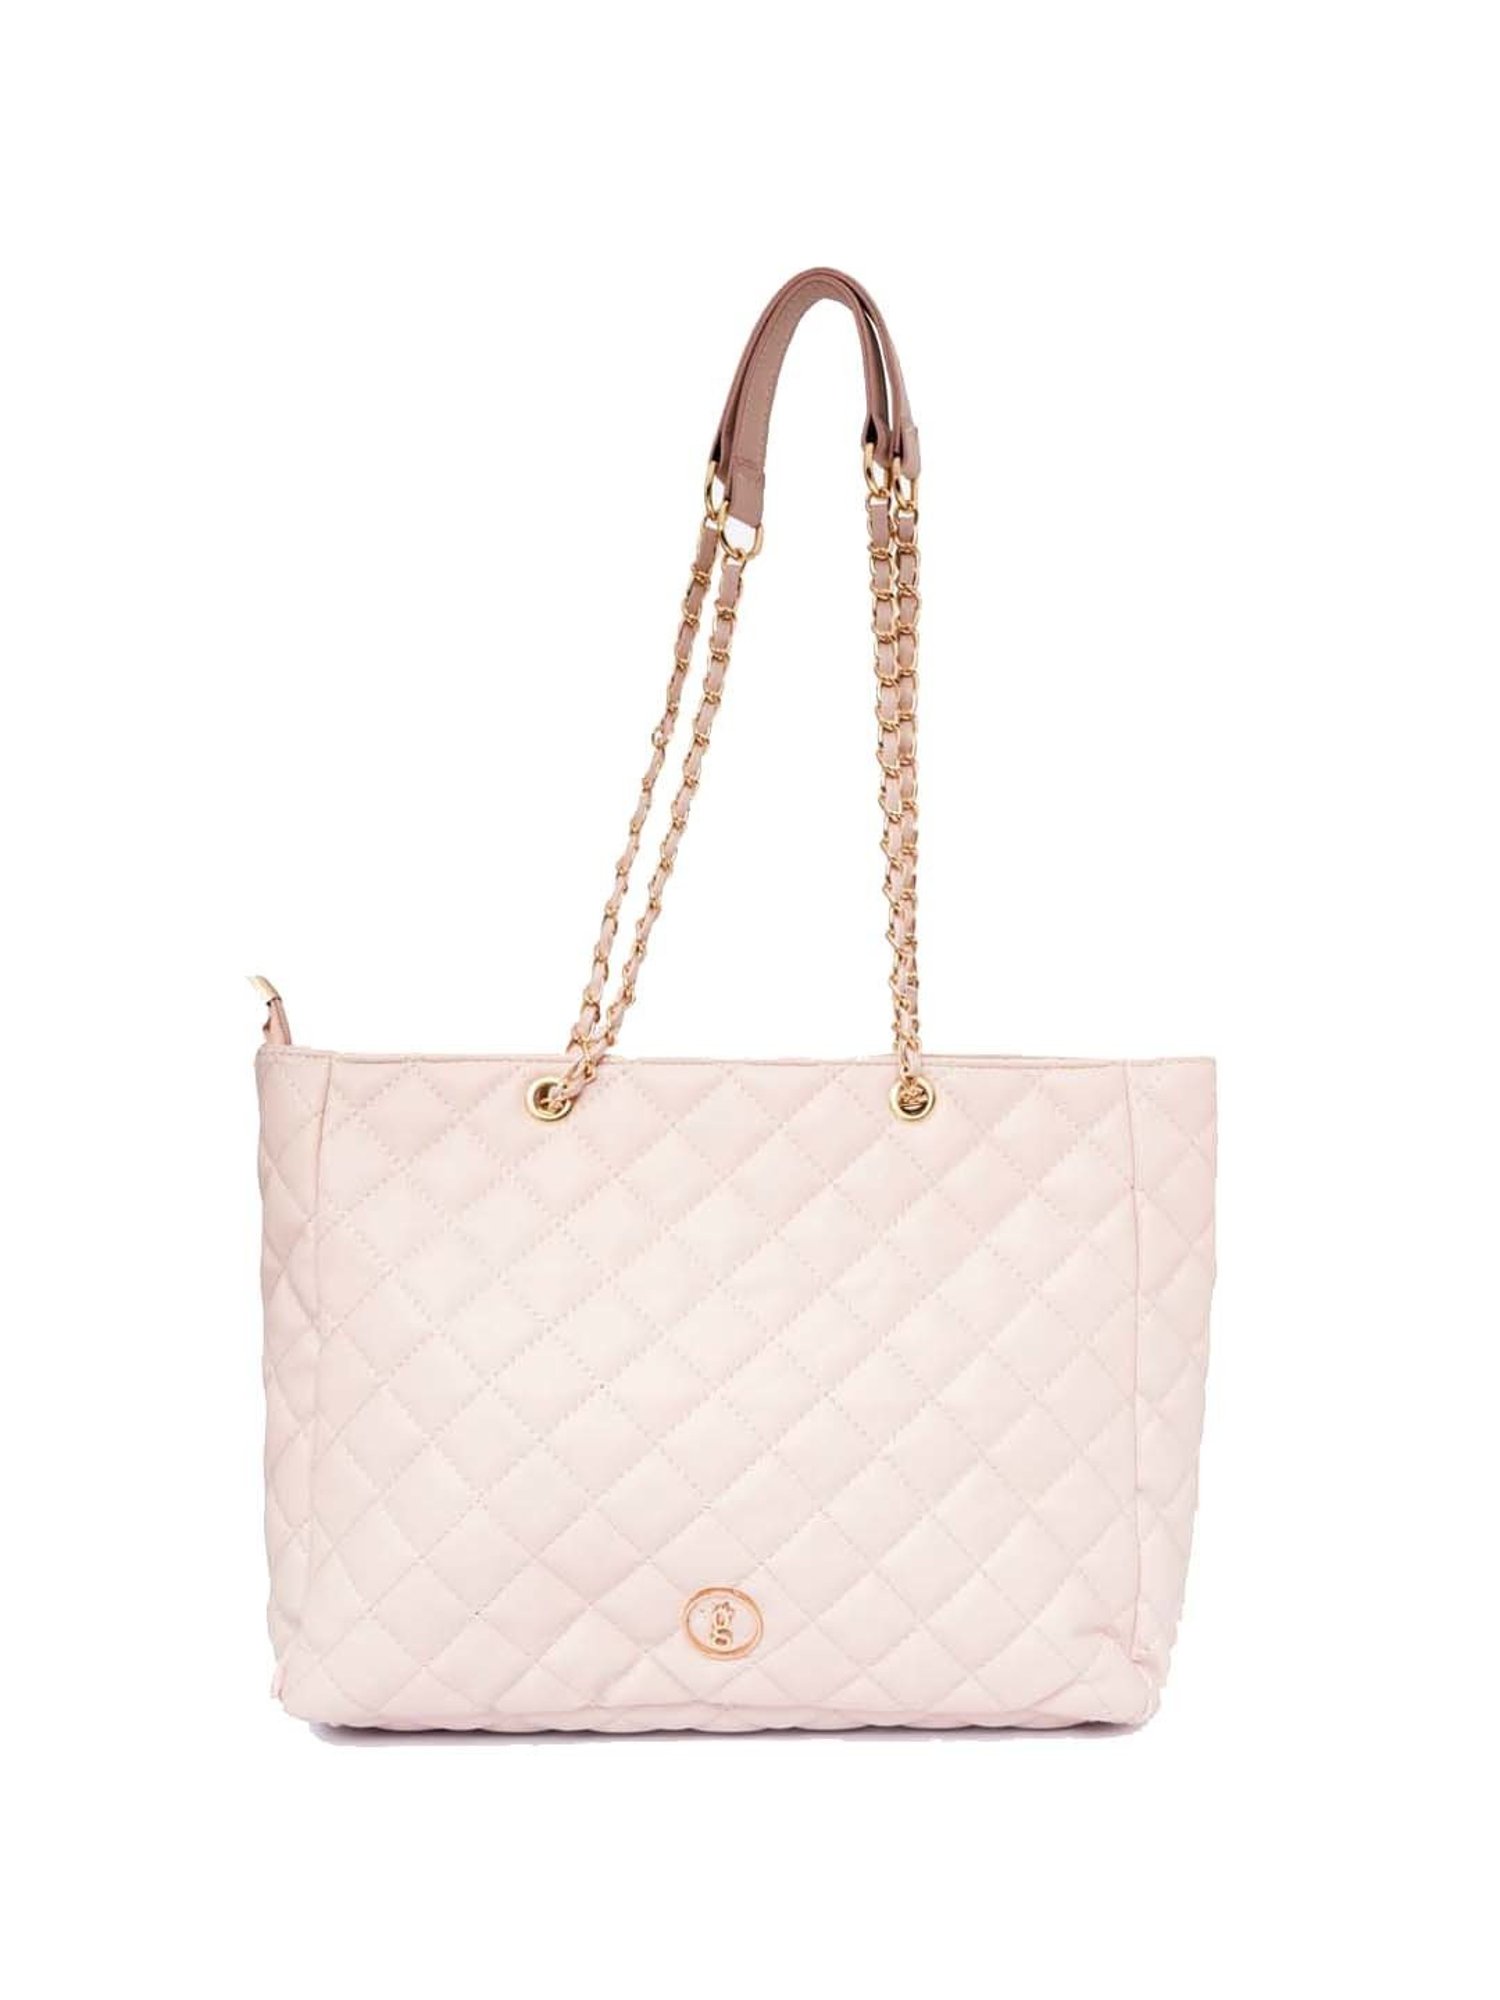 Buy Global Desi Nude Quilted Large Tote Handbag Online At Best Price @ Tata  CLiQ